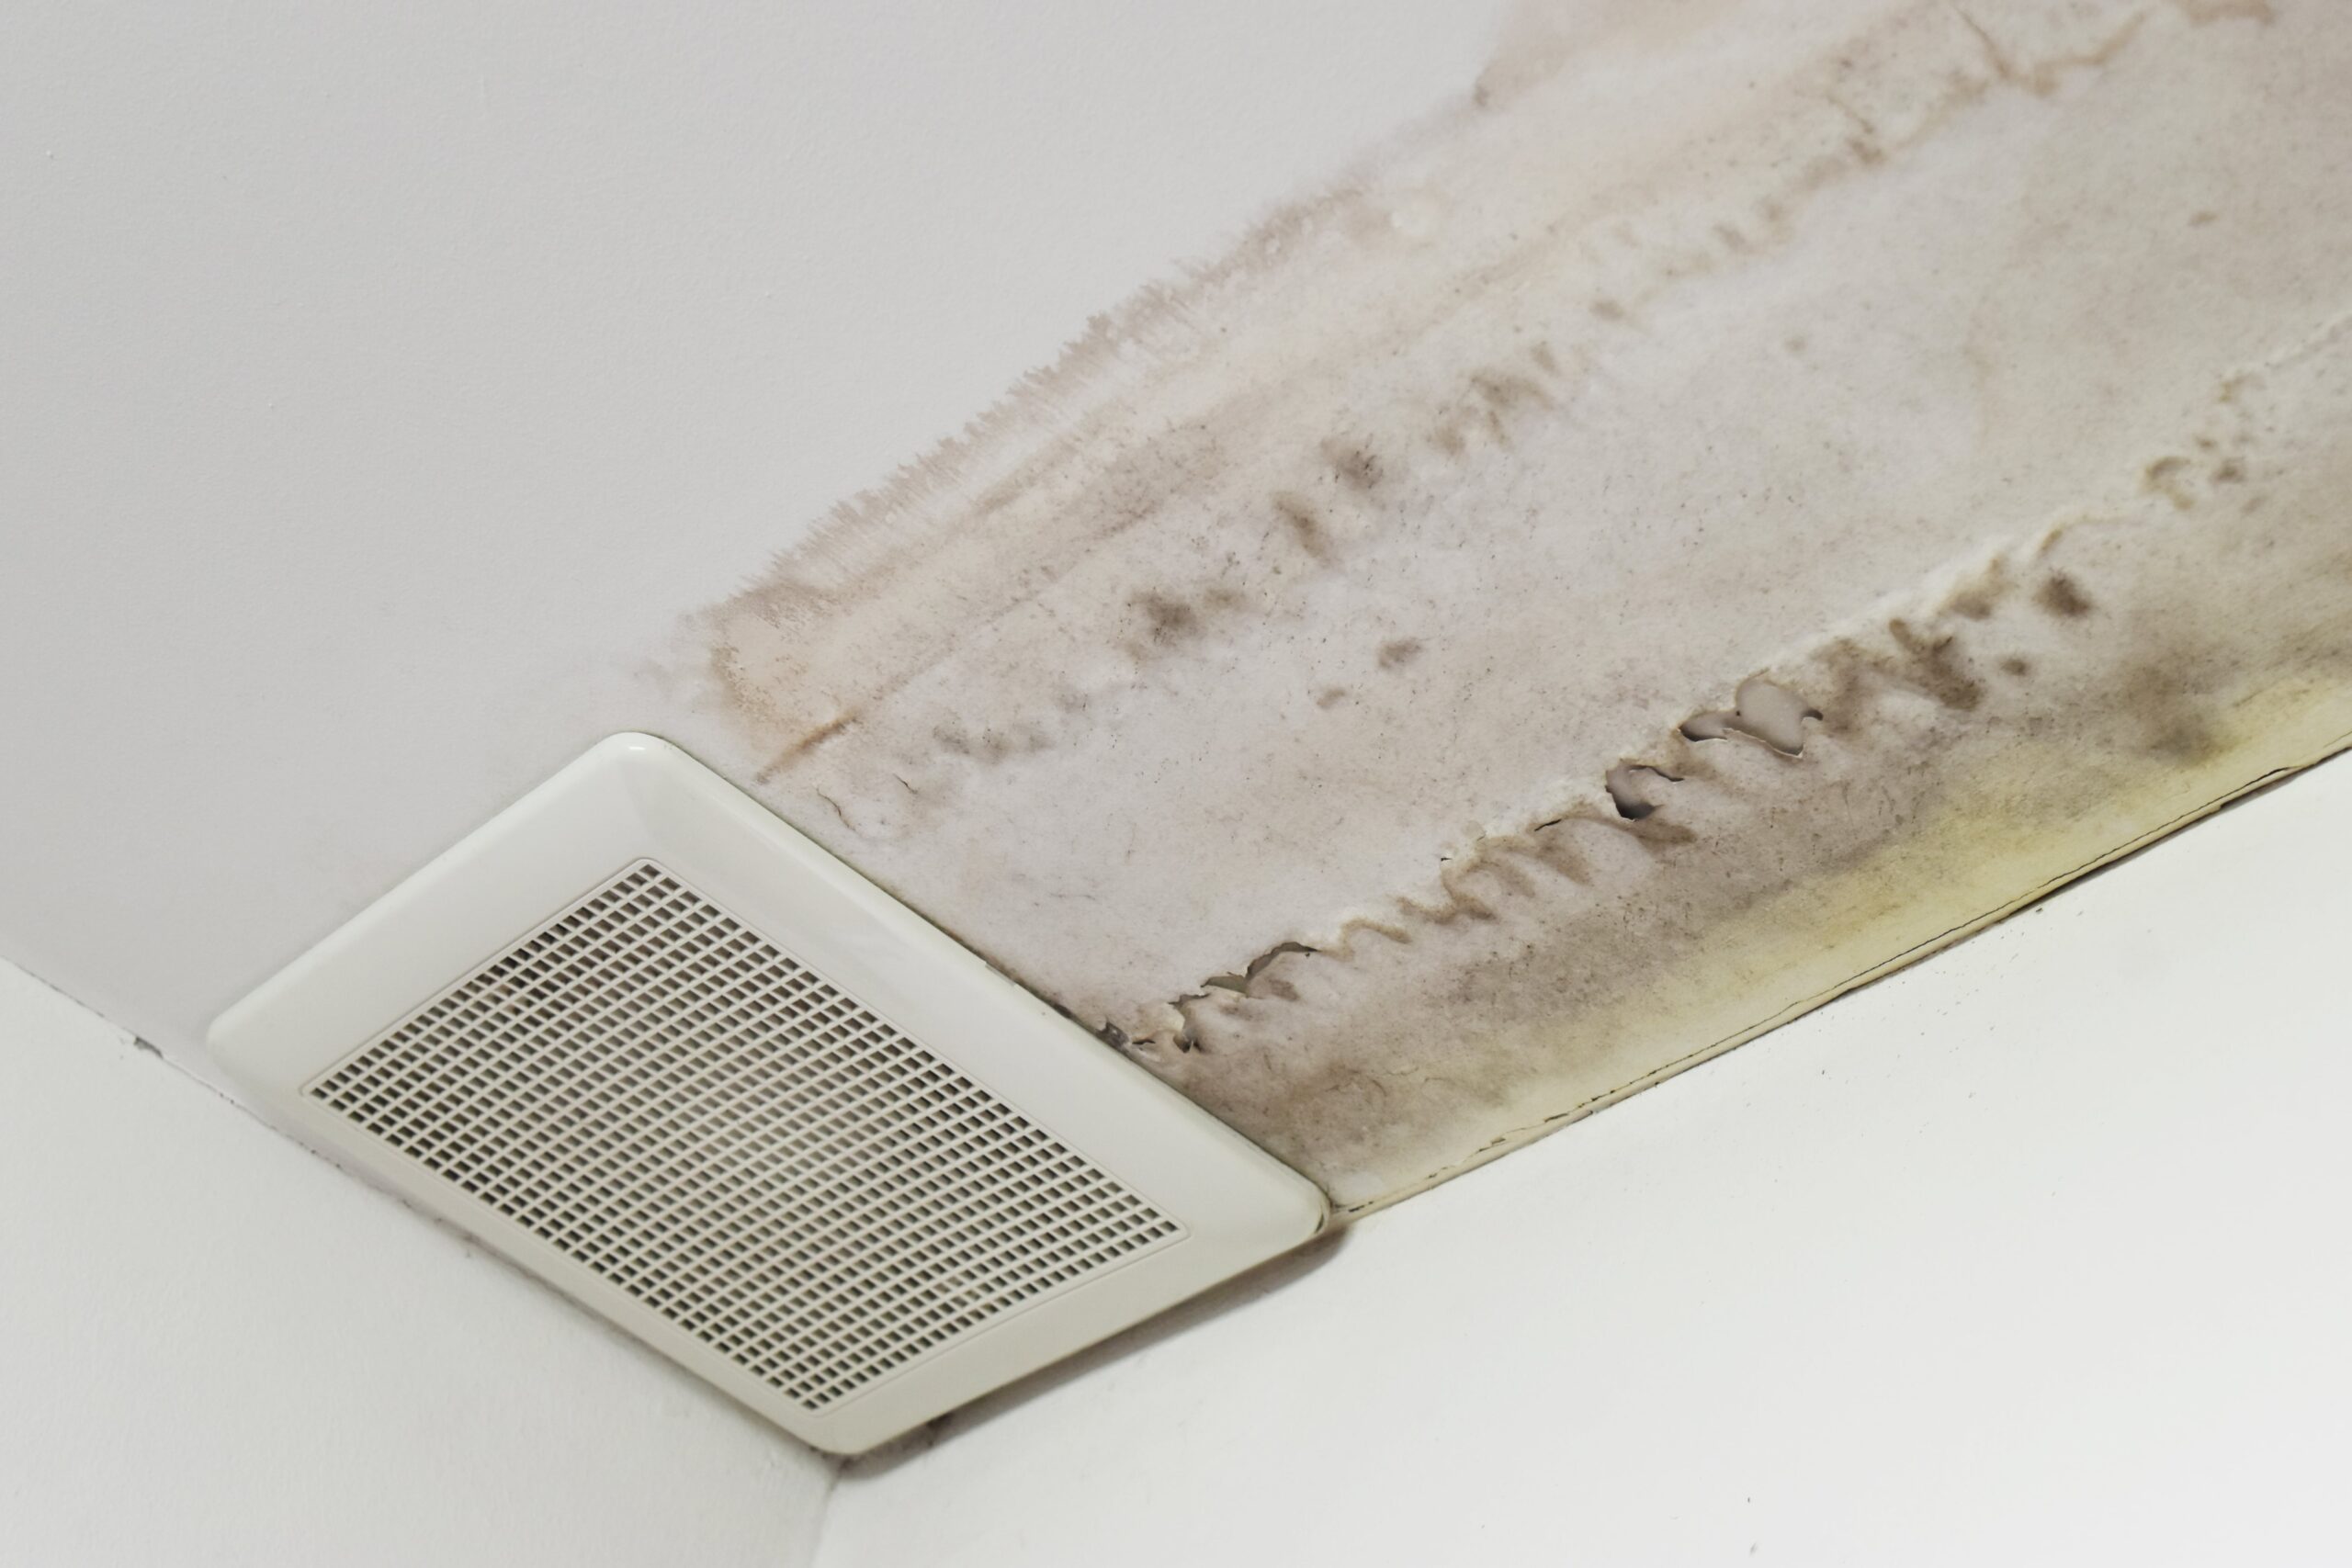 Mold on vent and ceiling show need for mold prevention and mold remediation